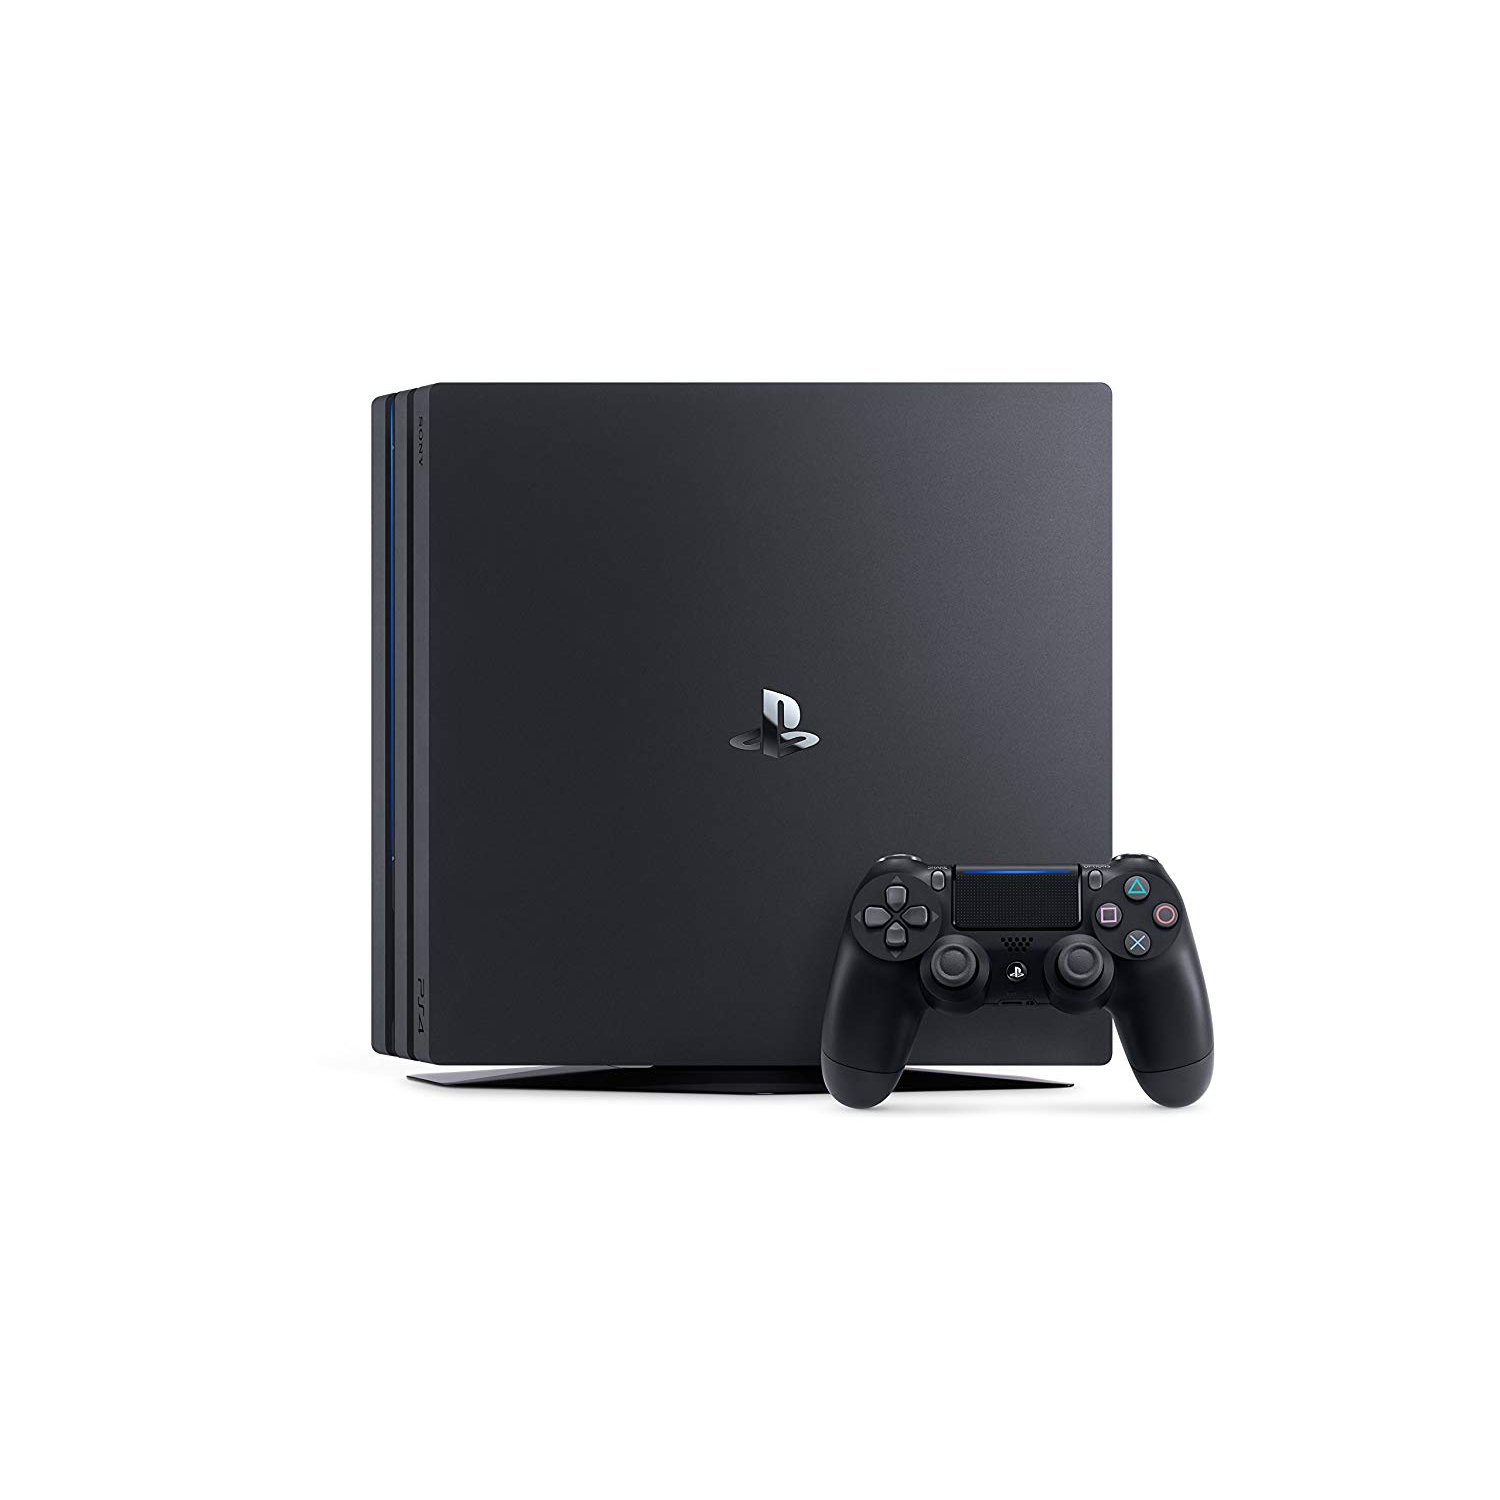 Sony 3003349 Playstation 4 PRO CUH-7215B 4K HDR Gaming Console - 1 TB - Jet Black, Refurbished